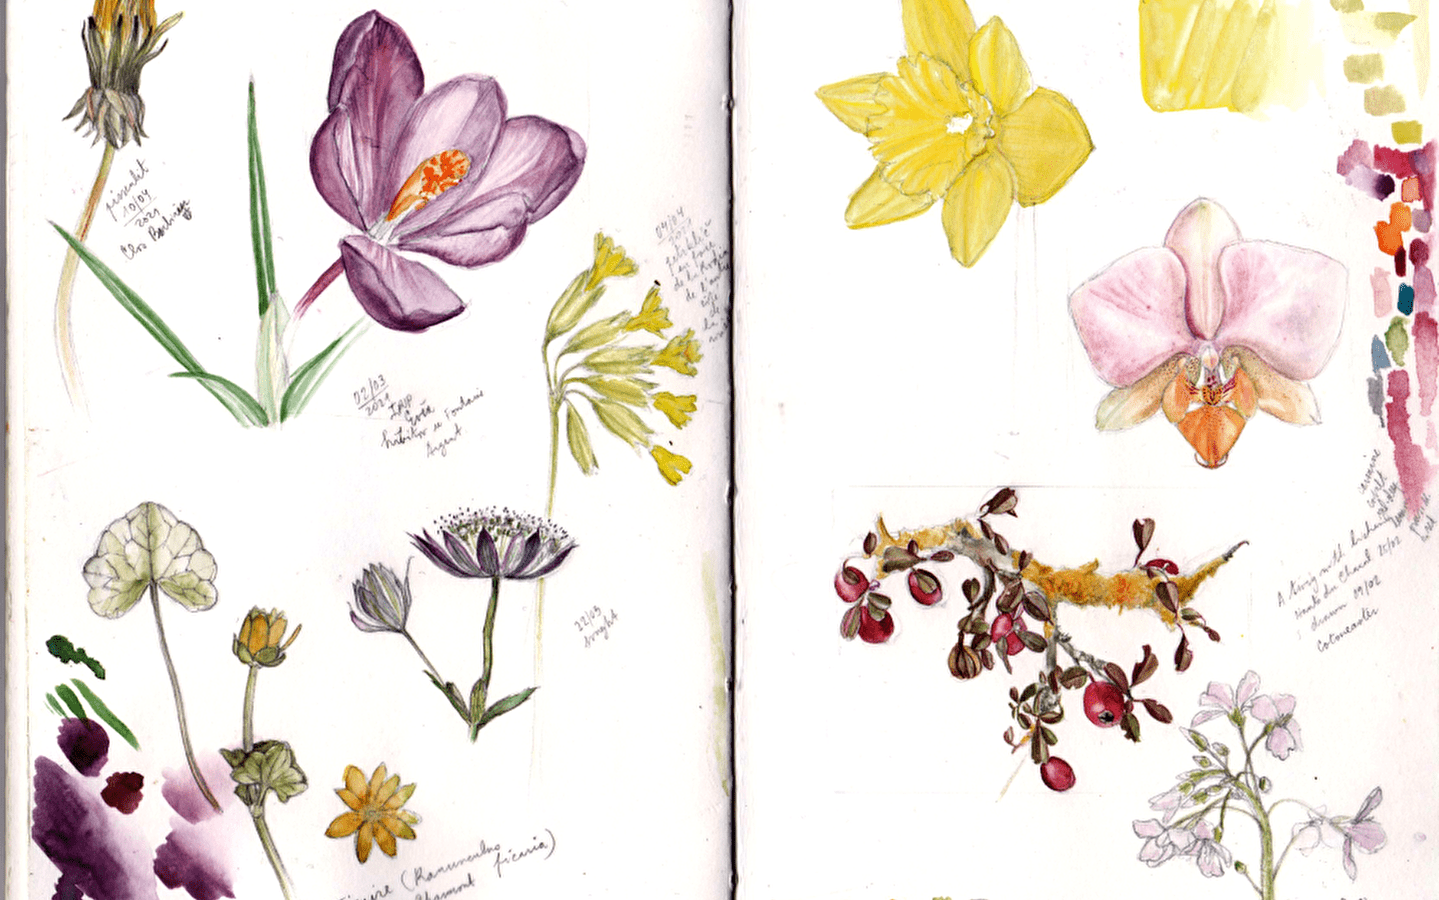 123 Nature Workshop: Introduction to botanical drawing